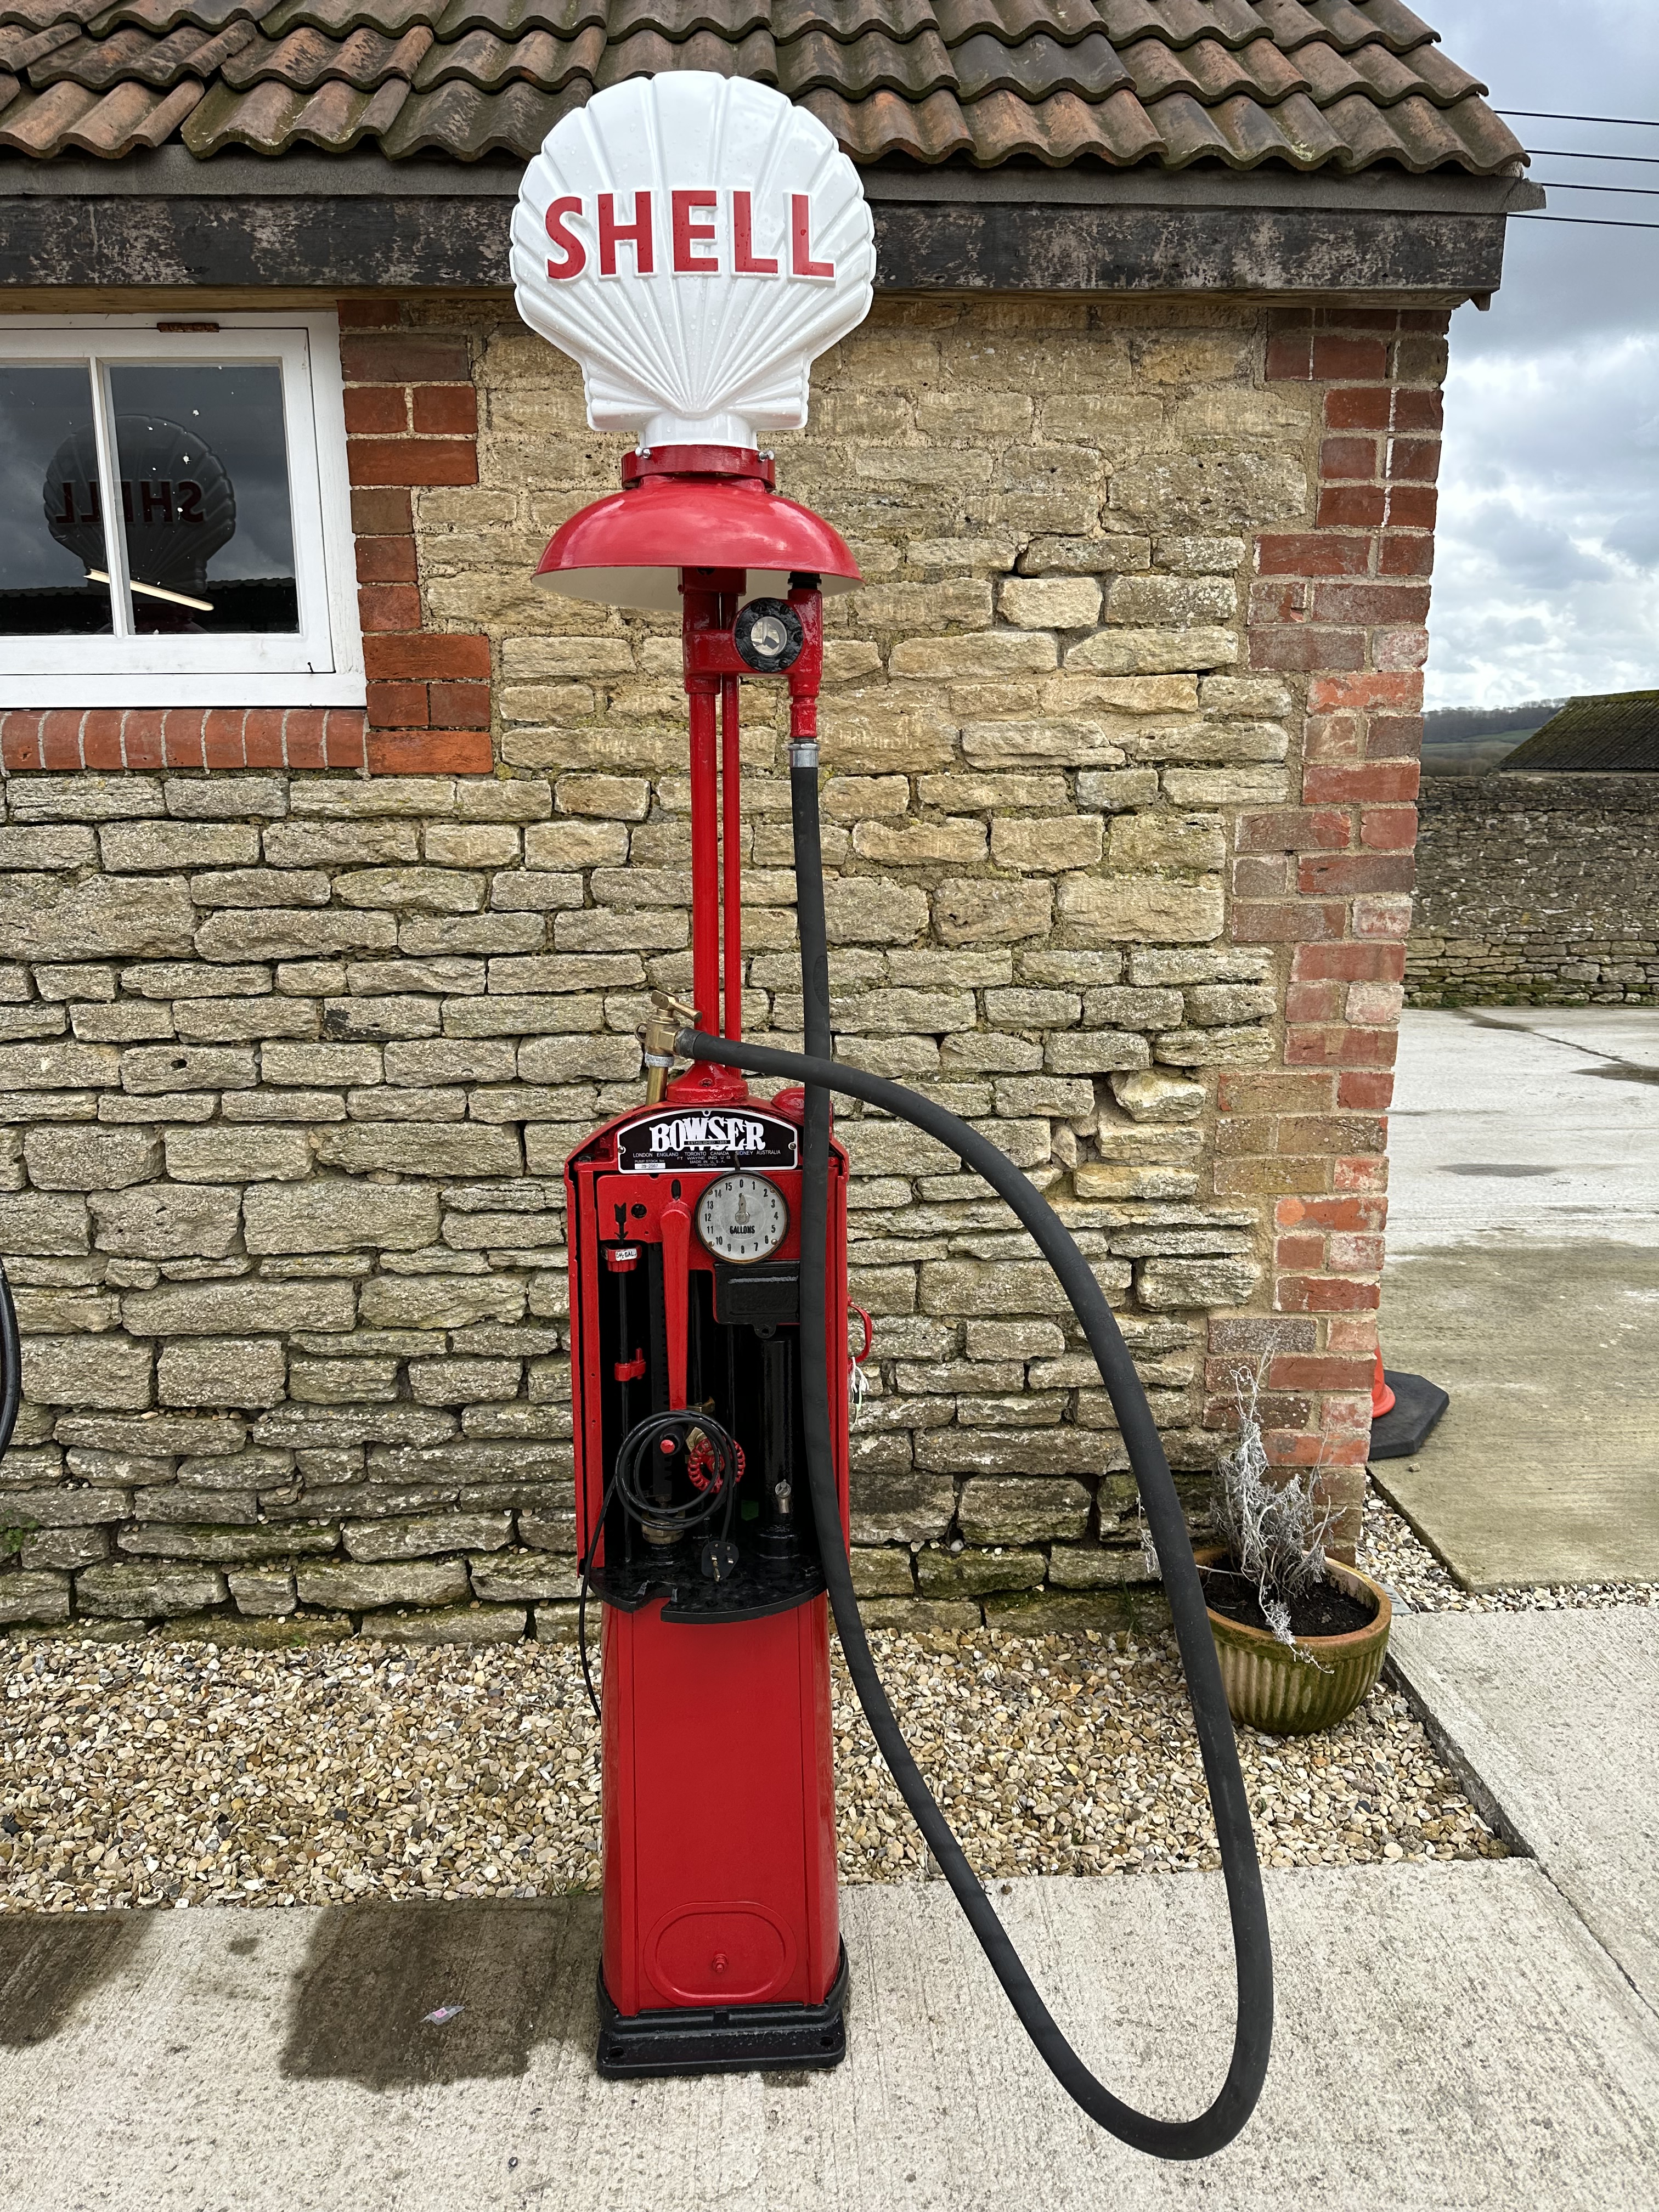 A Bowser hand-operated petrol pump, restored, with hose, nozzle and reproduction plastic petrol pump